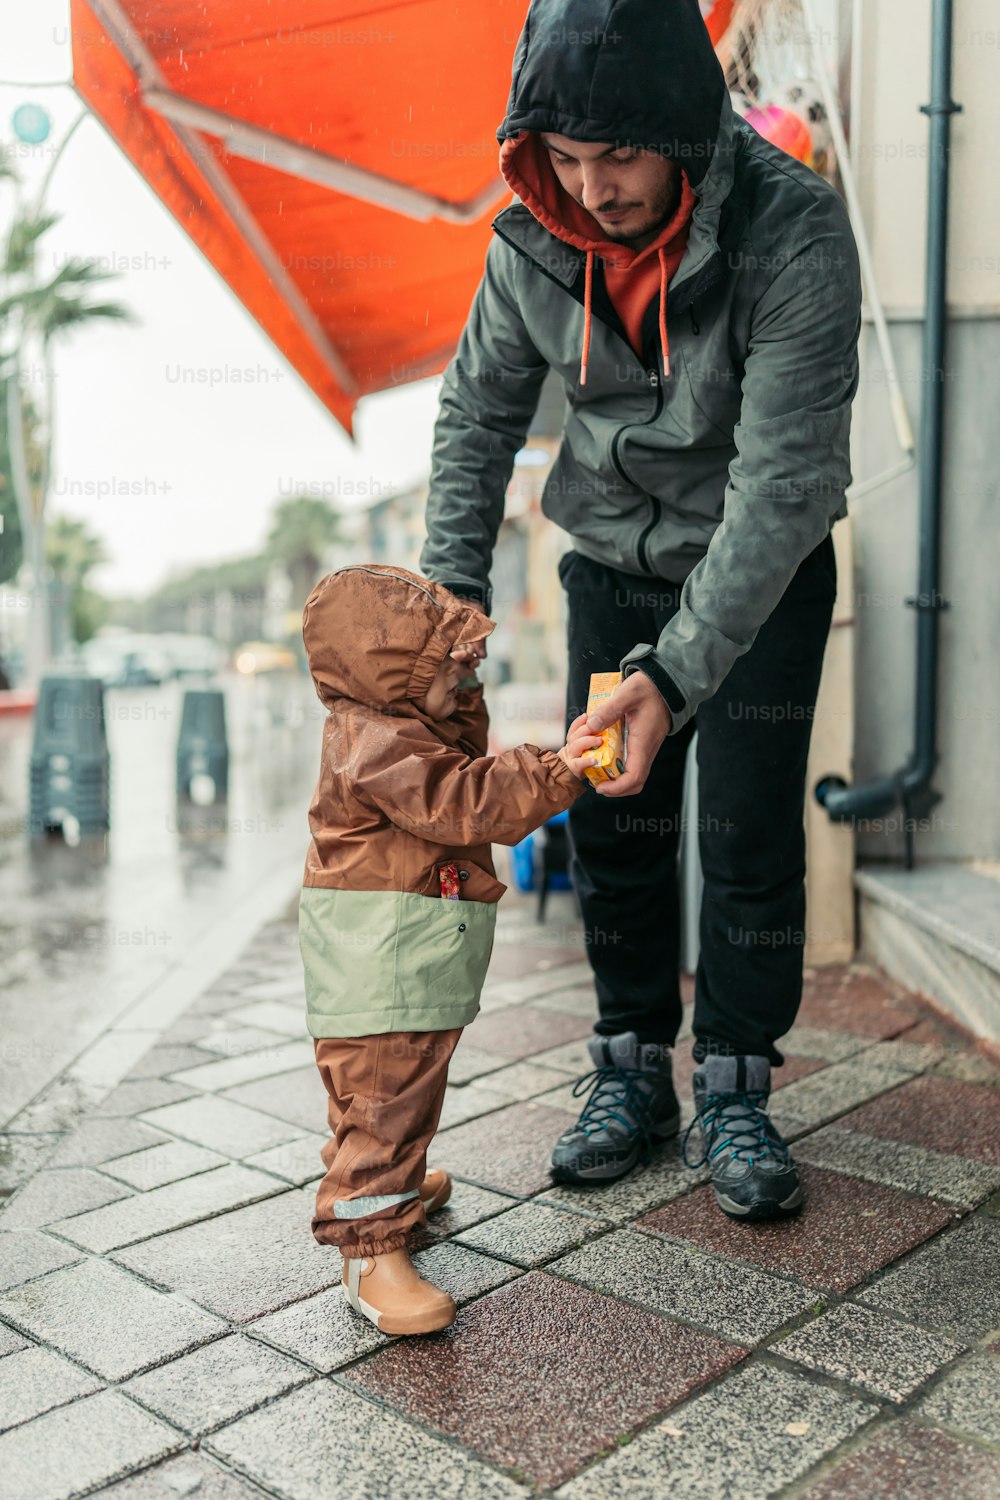 a man is holding a small child's hand